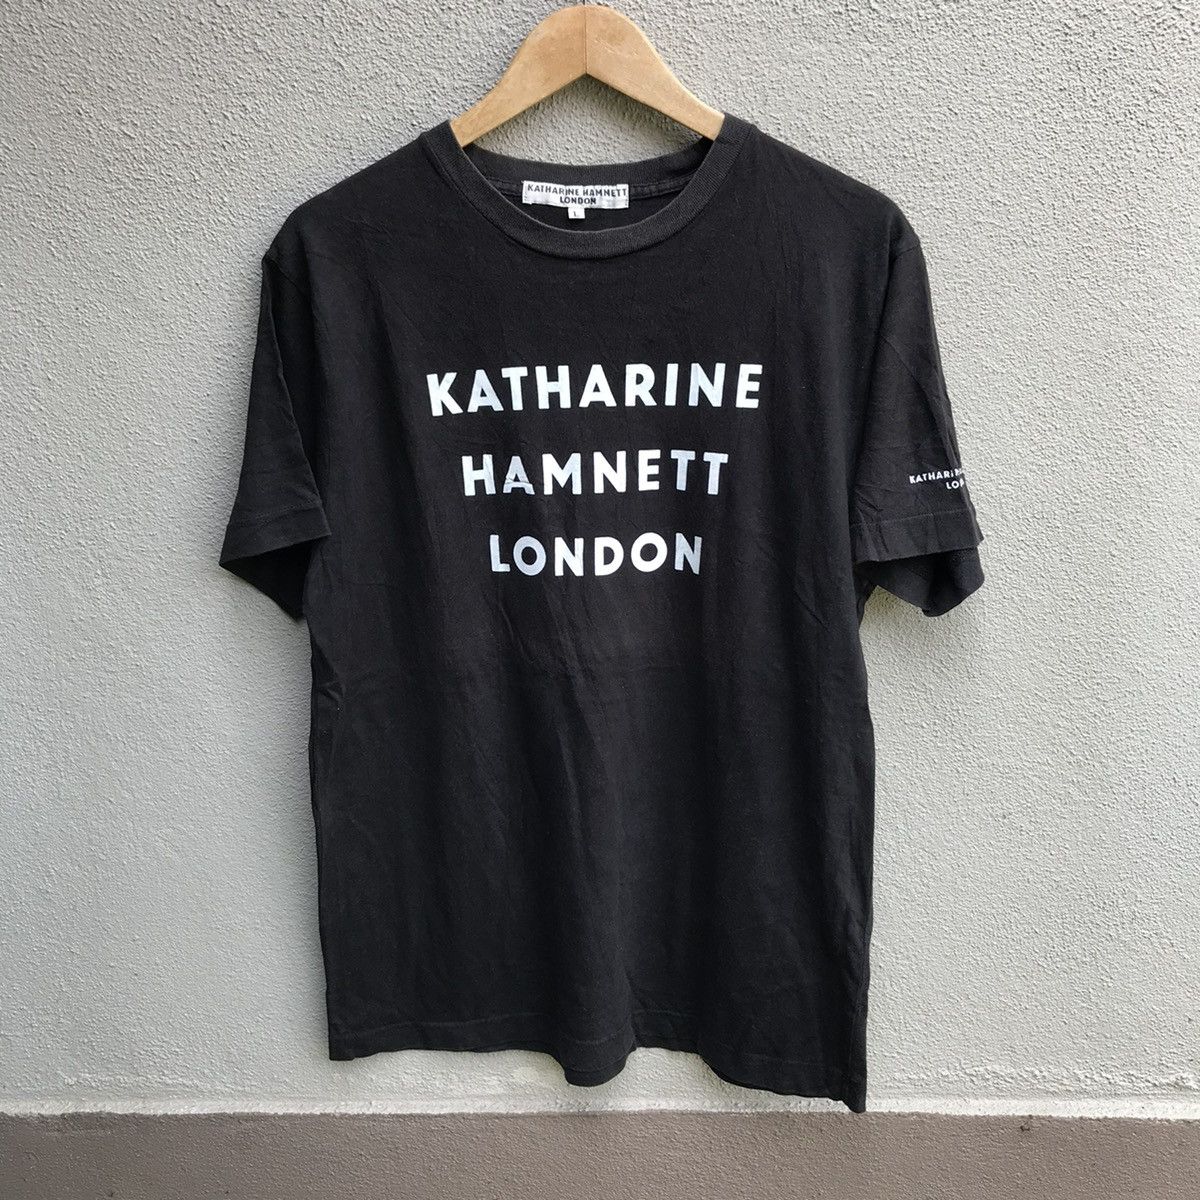 Katharine Hamnett London KATHARINE HAMNETT LONDON tee spellout